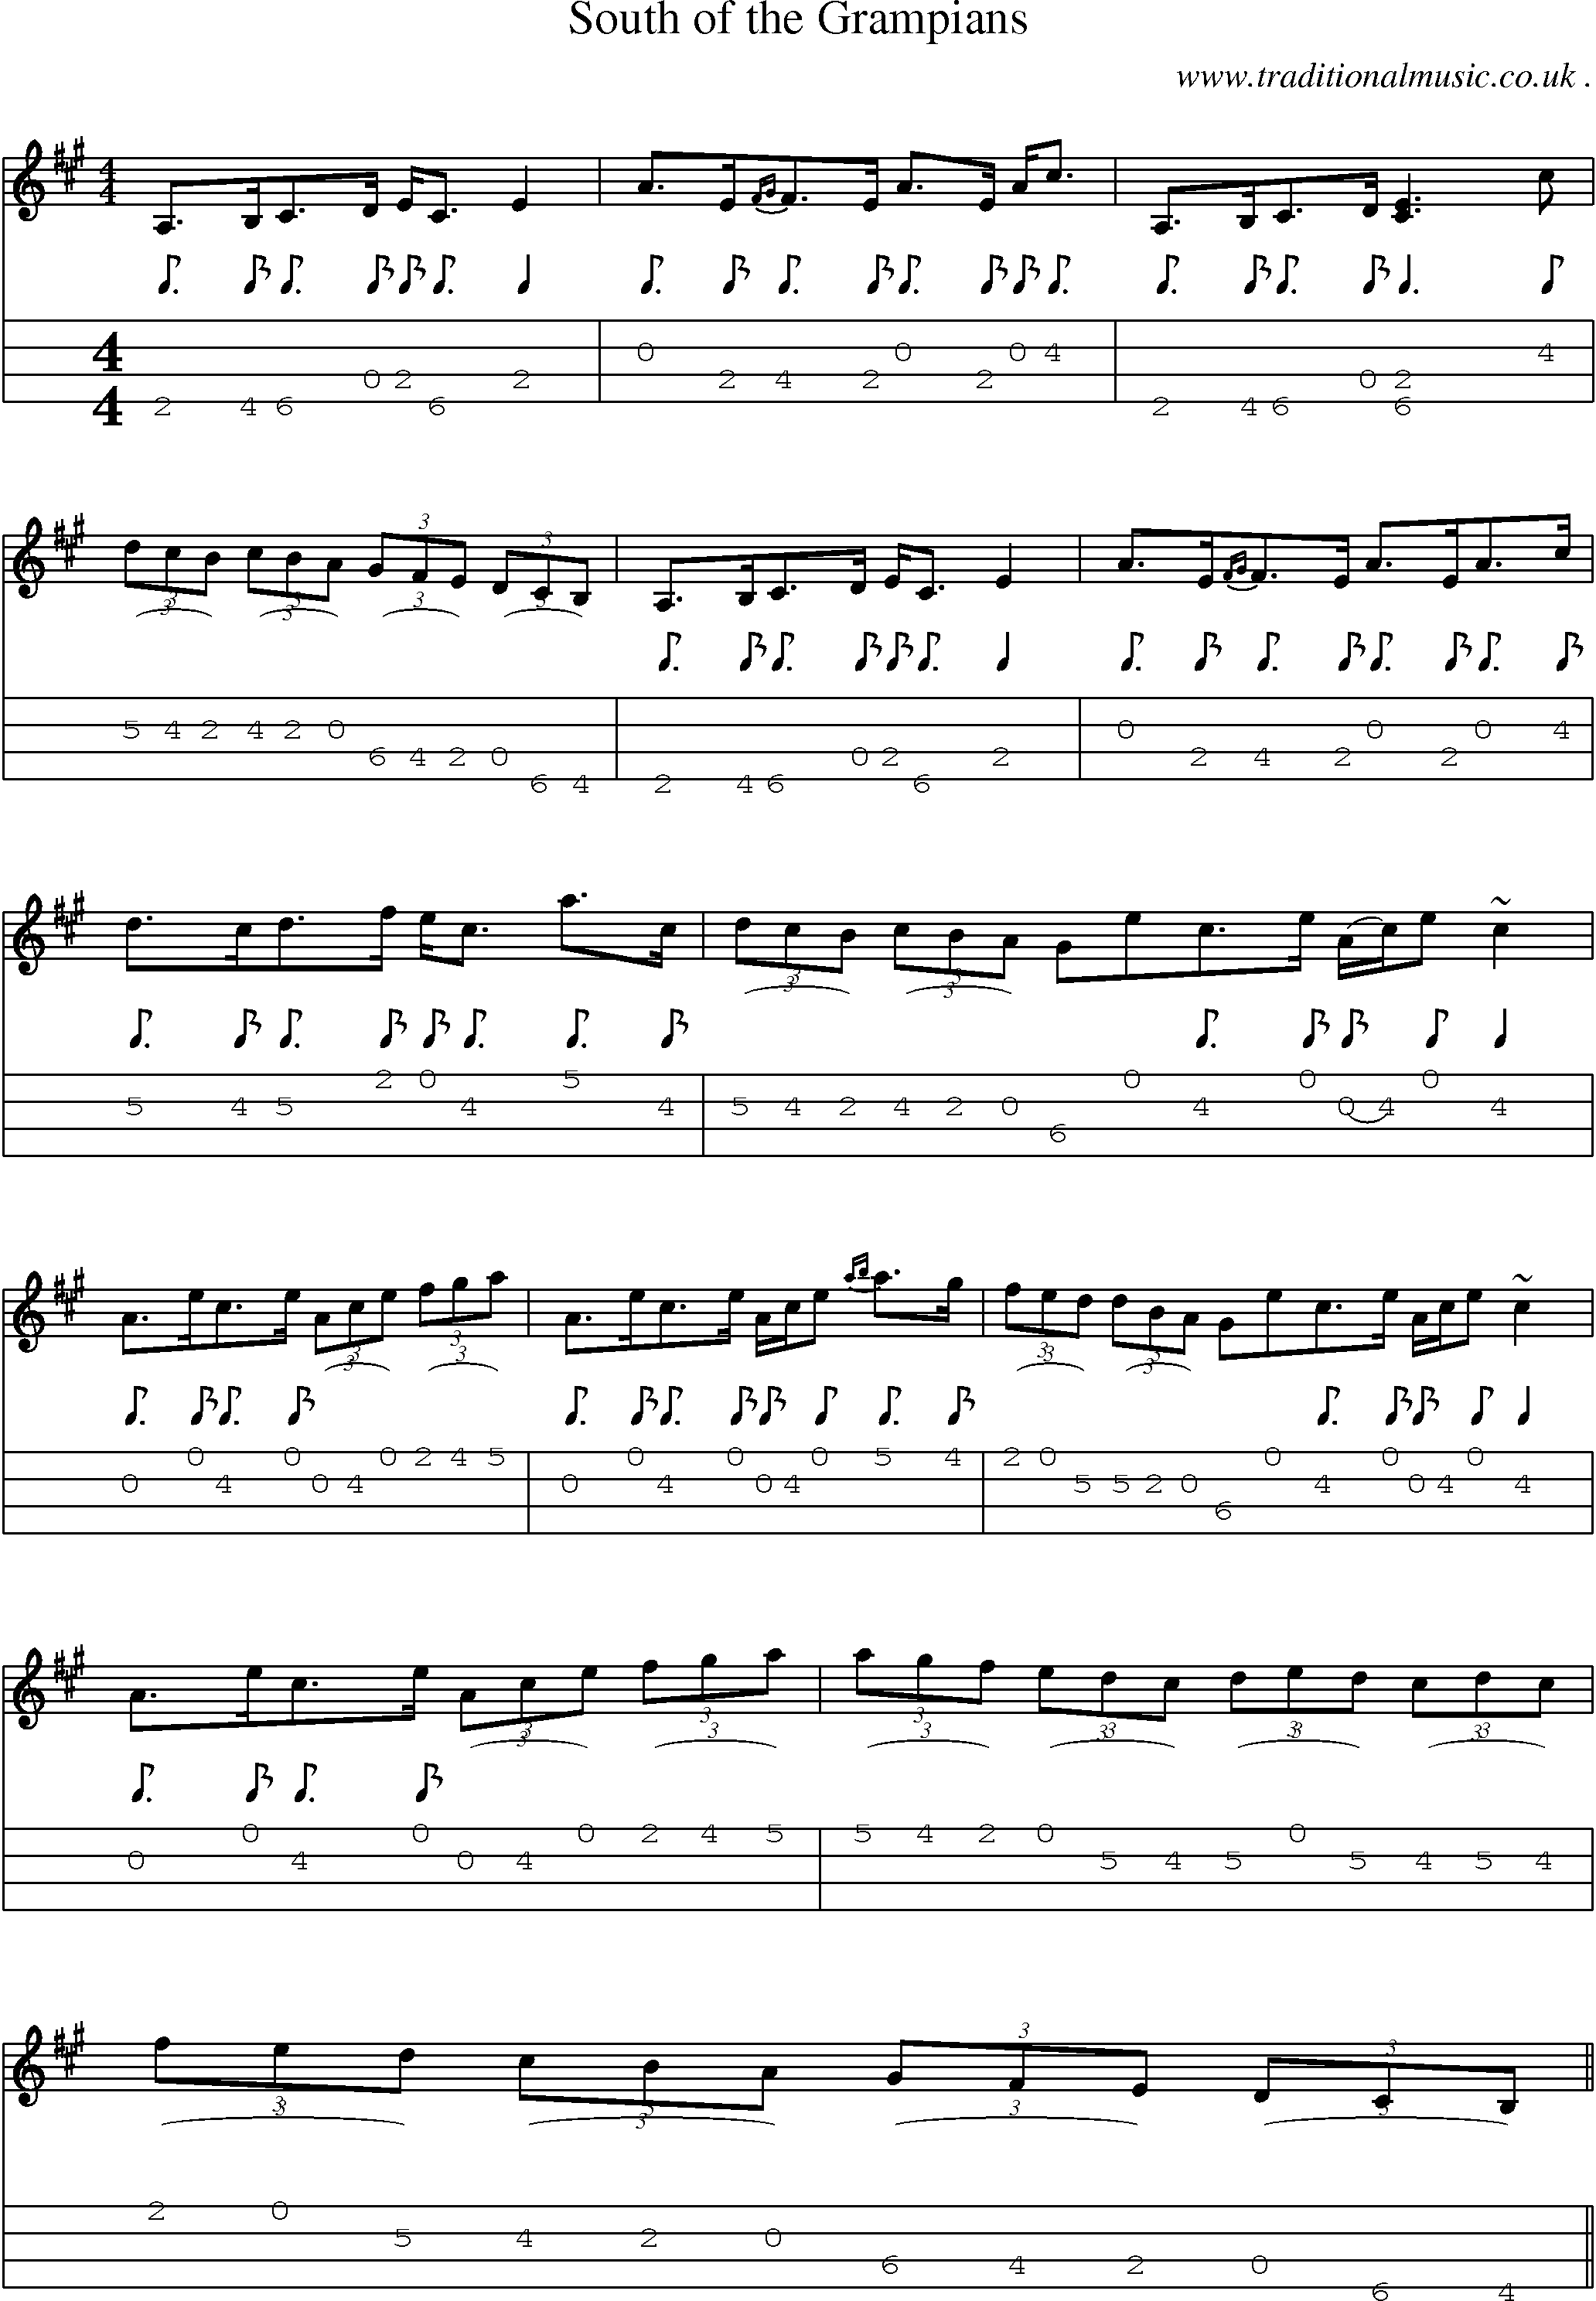 Sheet-music  score, Chords and Mandolin Tabs for South Of The Grampians